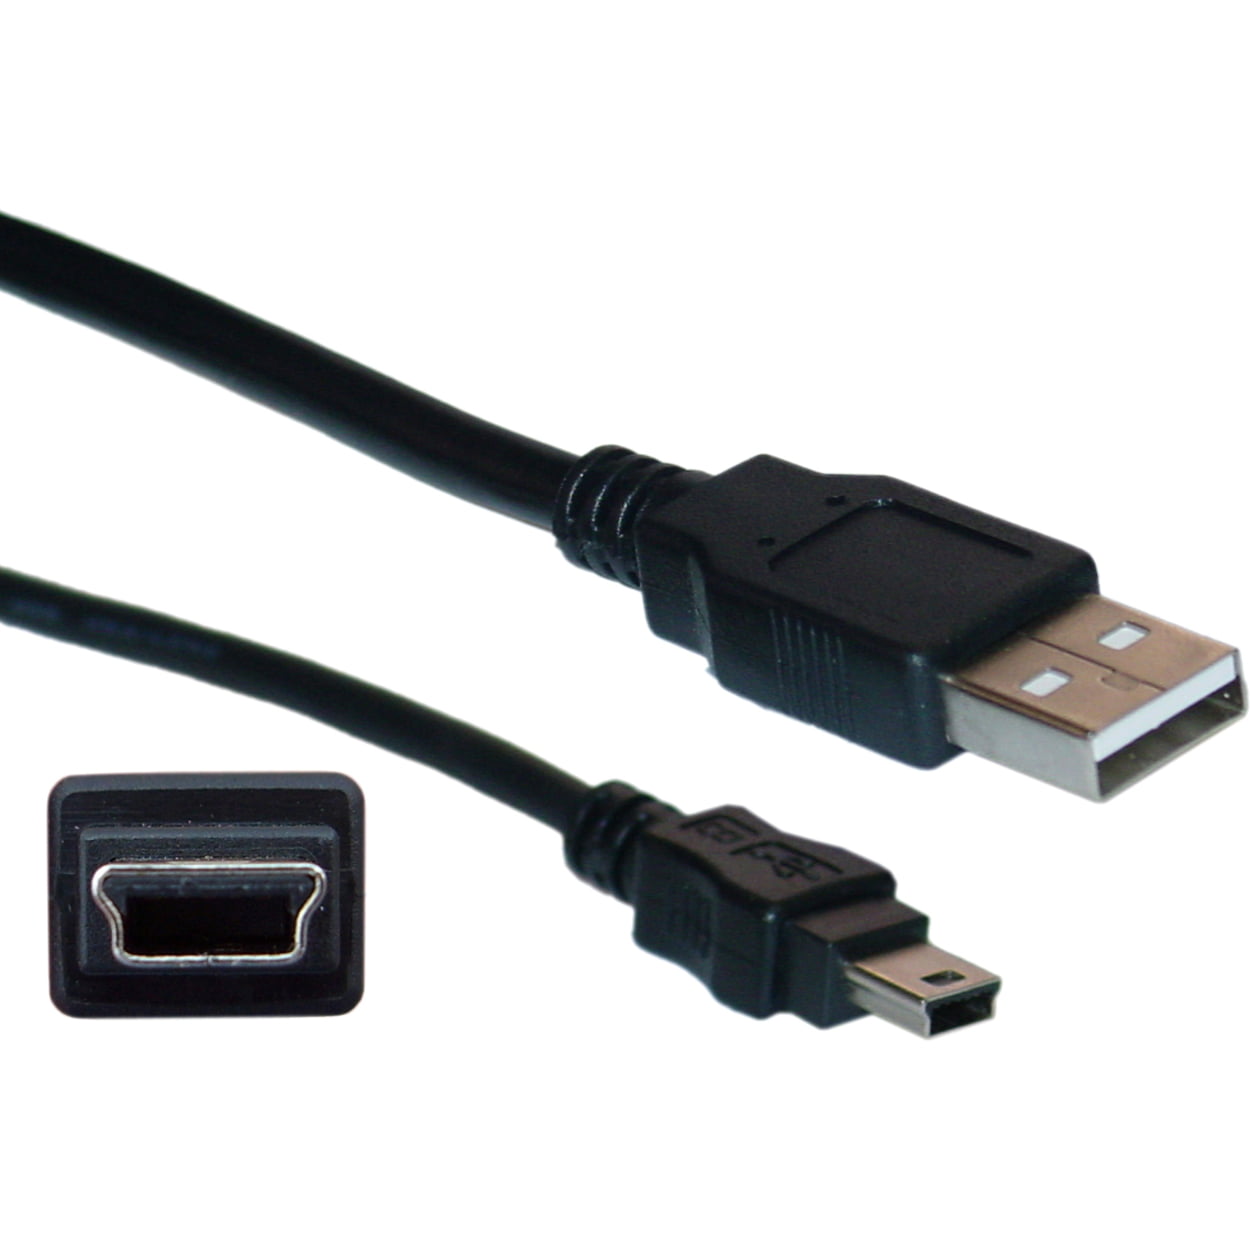 BoltLion BL-699738 High Speed Micro USB 2.0 Cable 1.5 Feet A Male to Micro B Male 6 Pack Black 